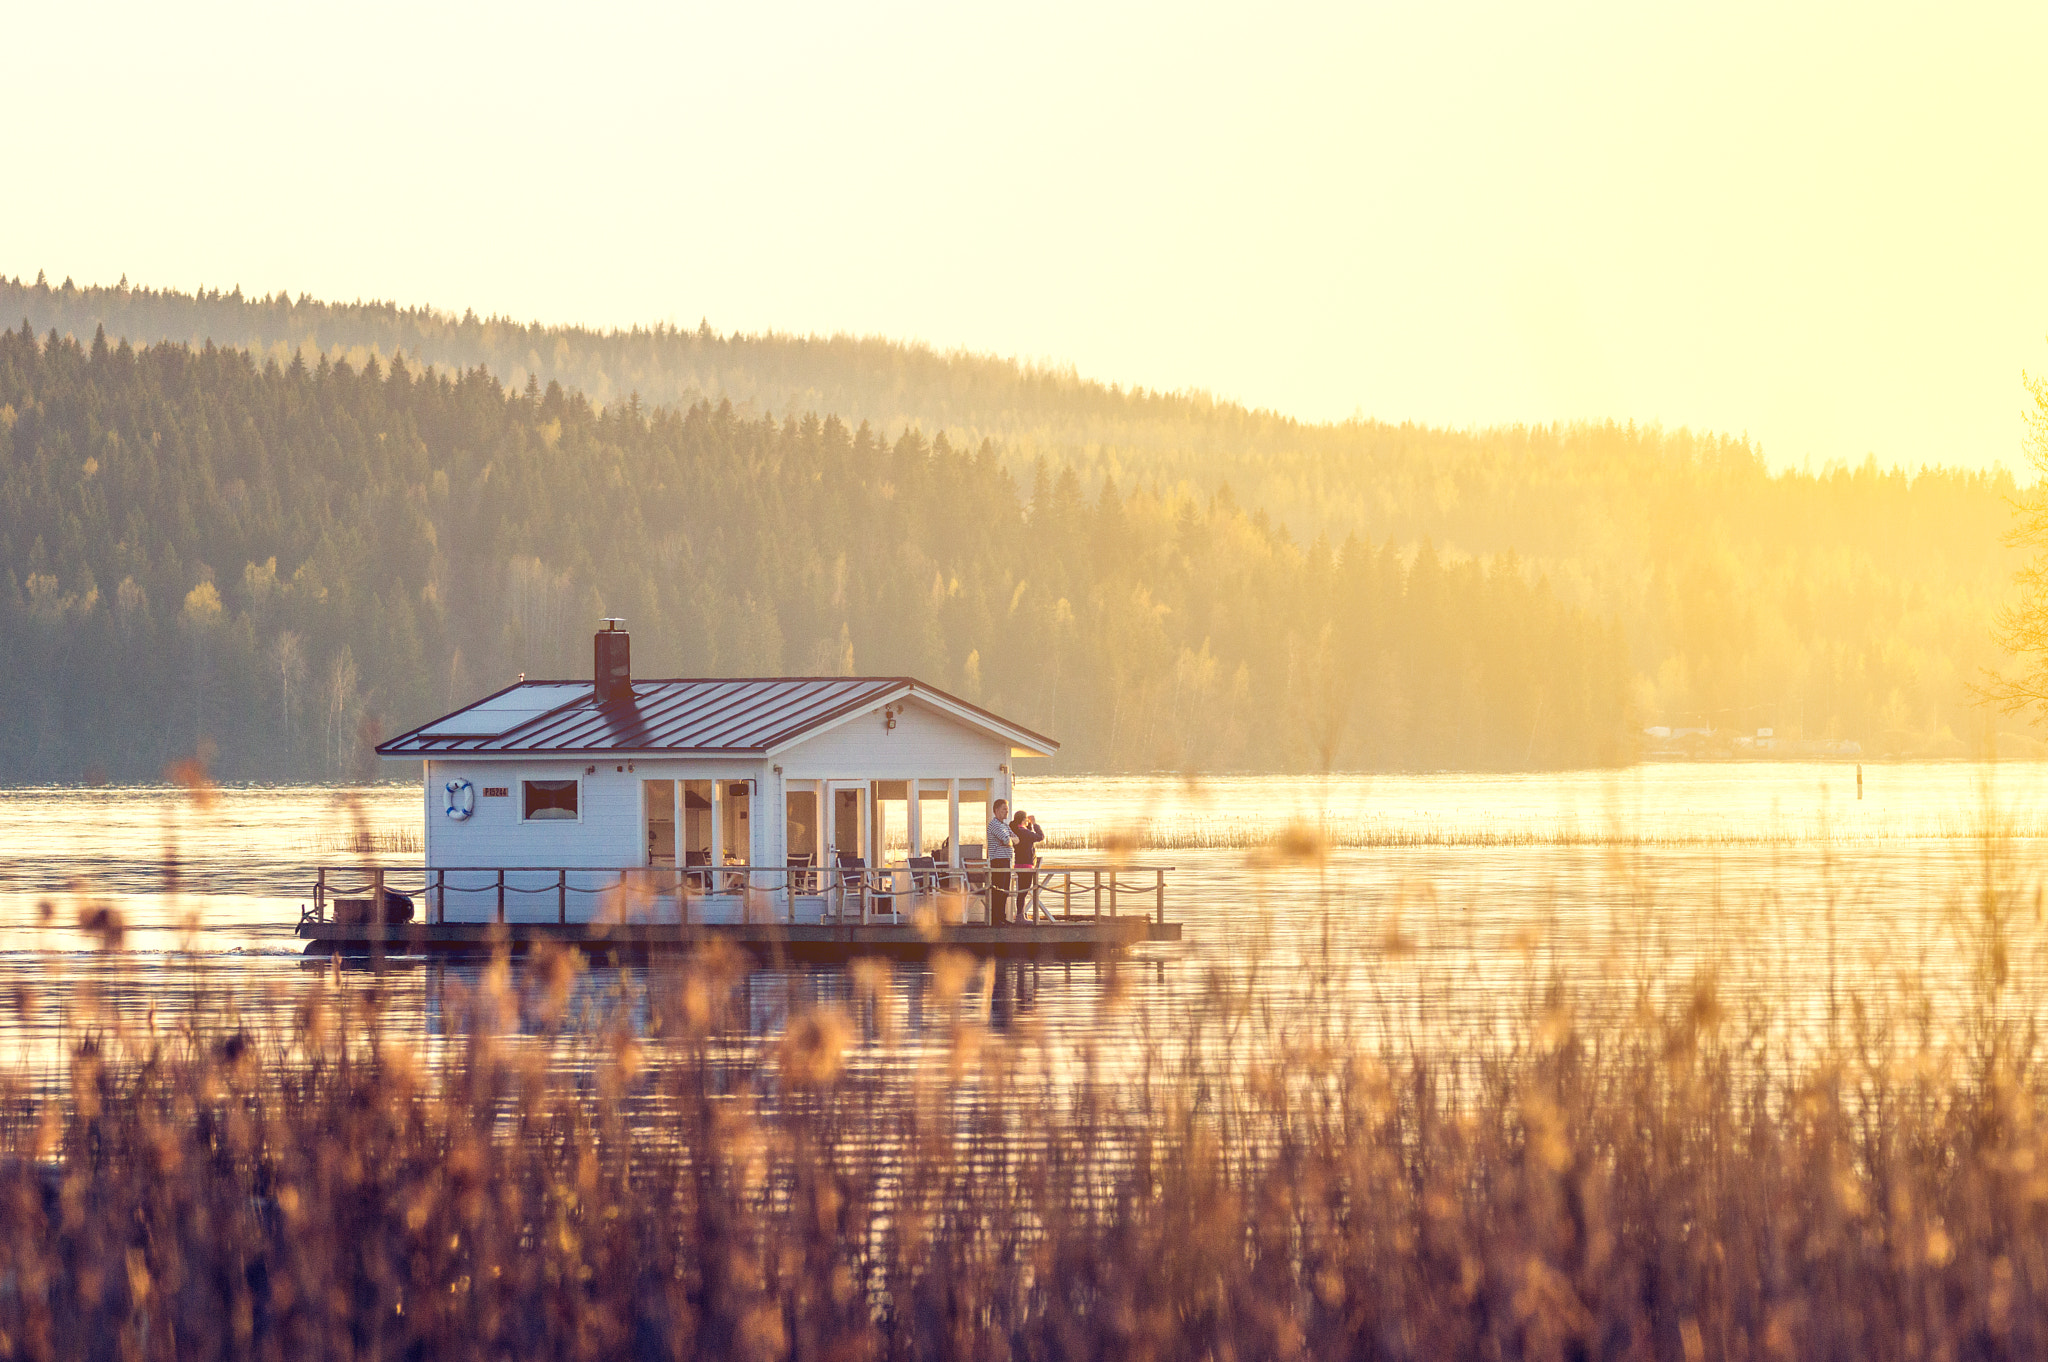 Nikon D3200 + Sigma 150-600mm F5-6.3 DG OS HSM | C sample photo. Little house on the waterie photography